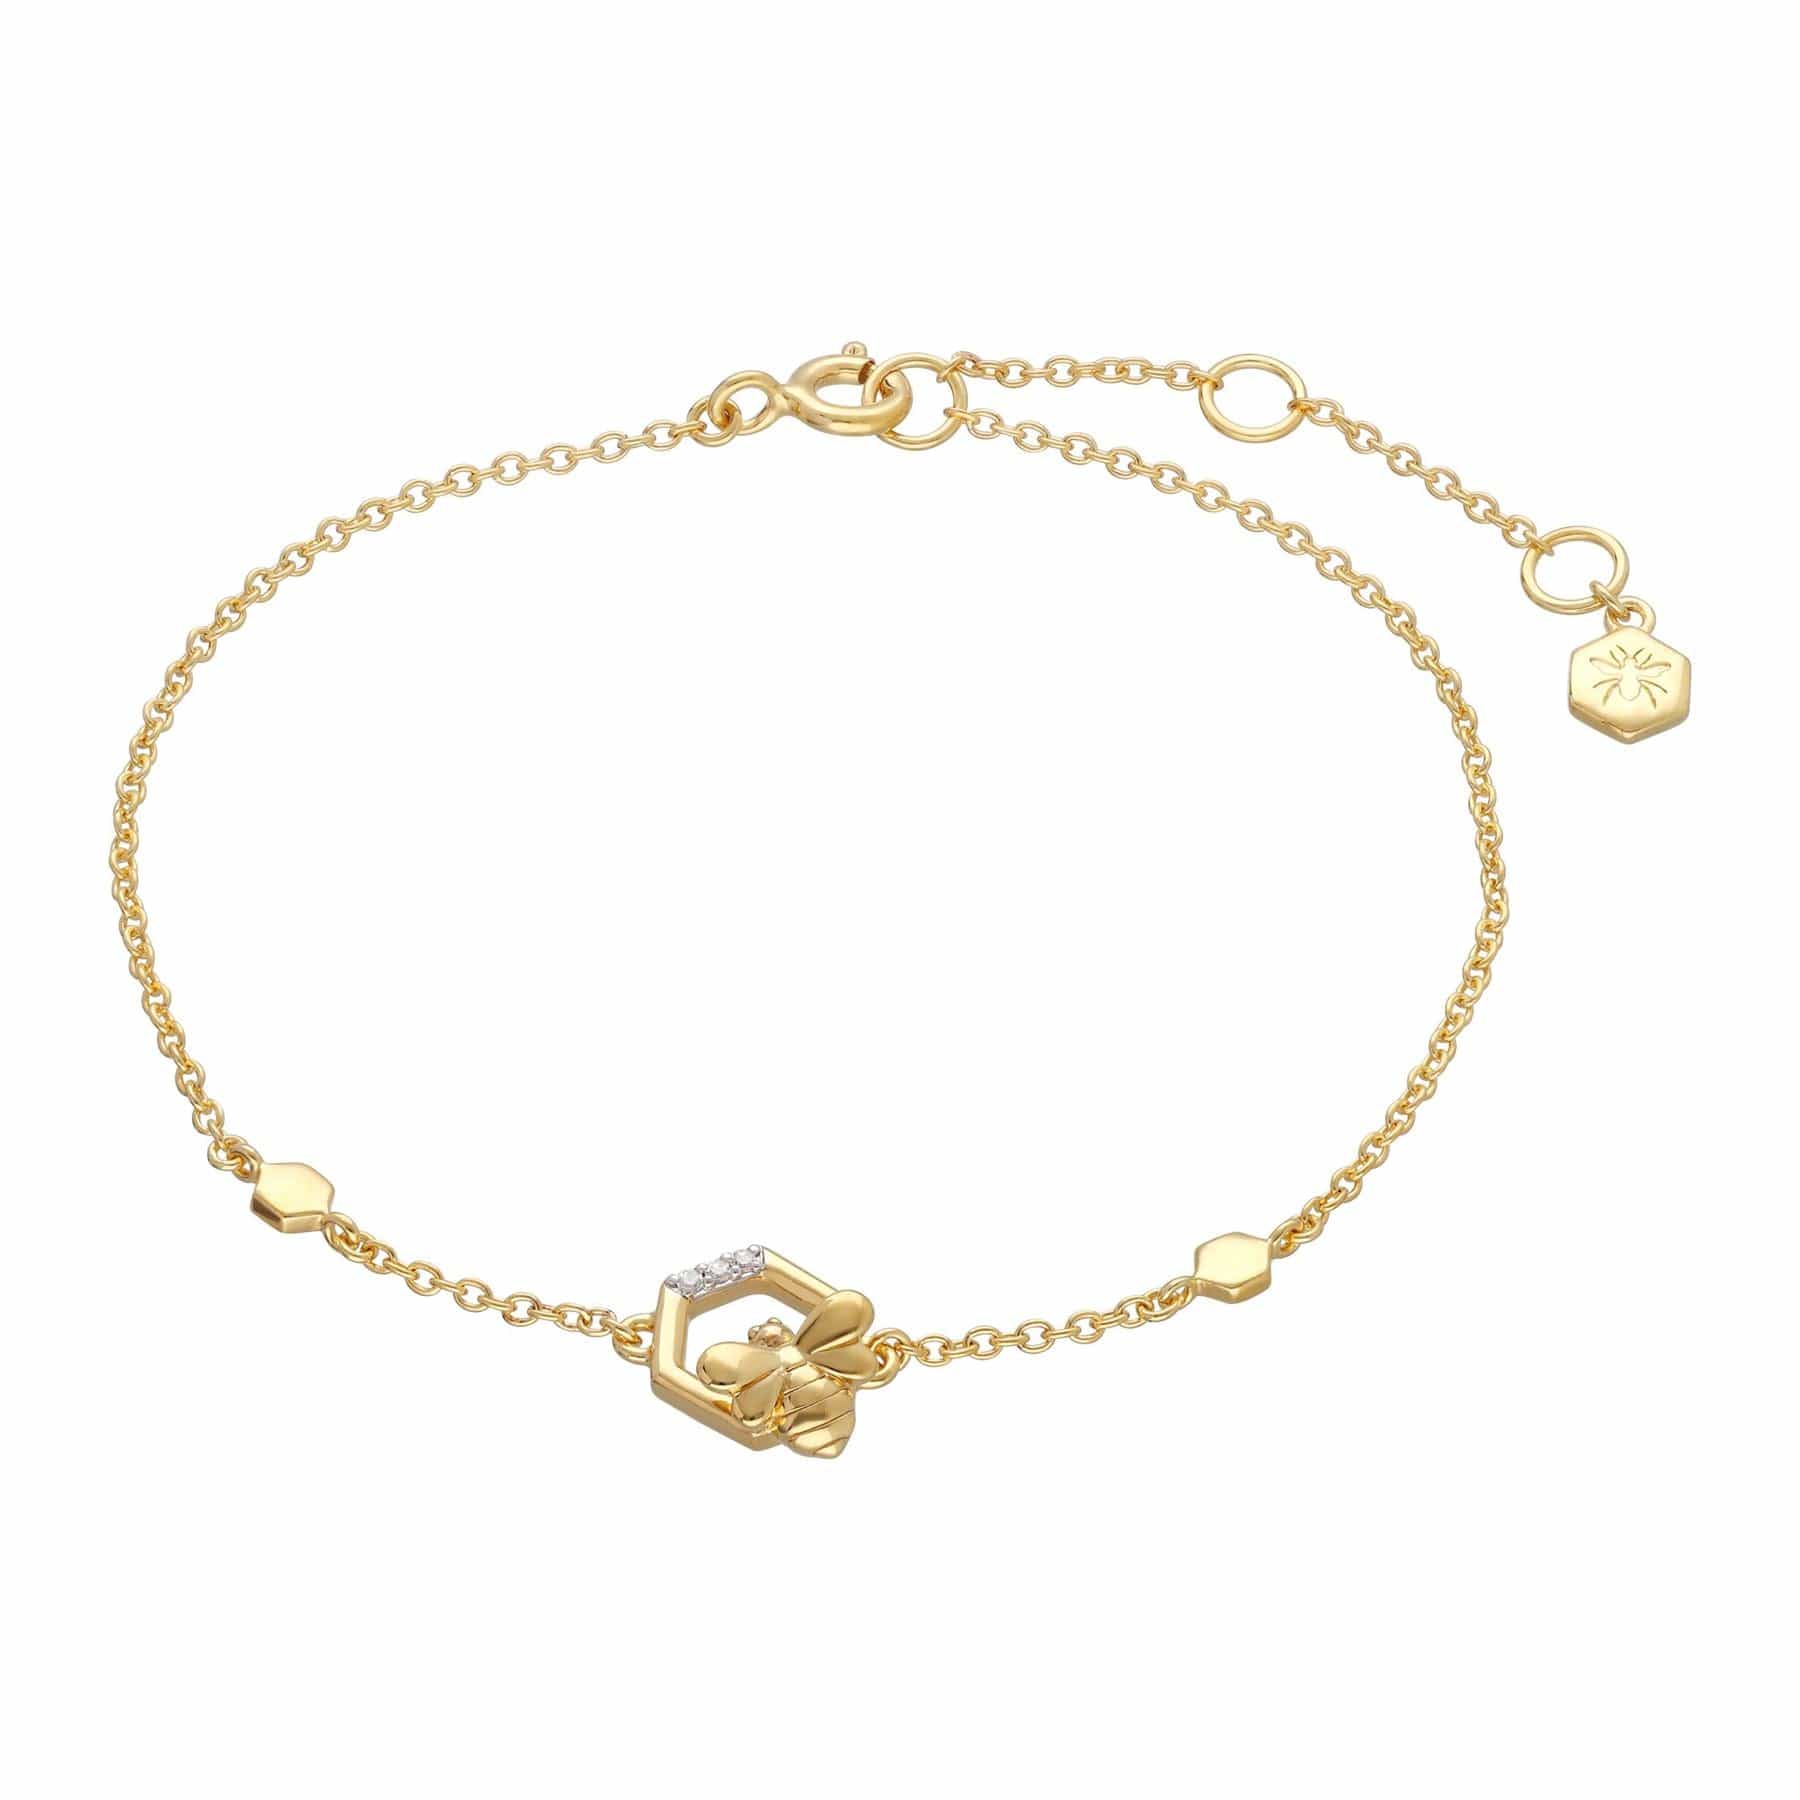 191L0160019 Honeycomb Inspired Bee Bracelet in 9ct Yellow Gold 1